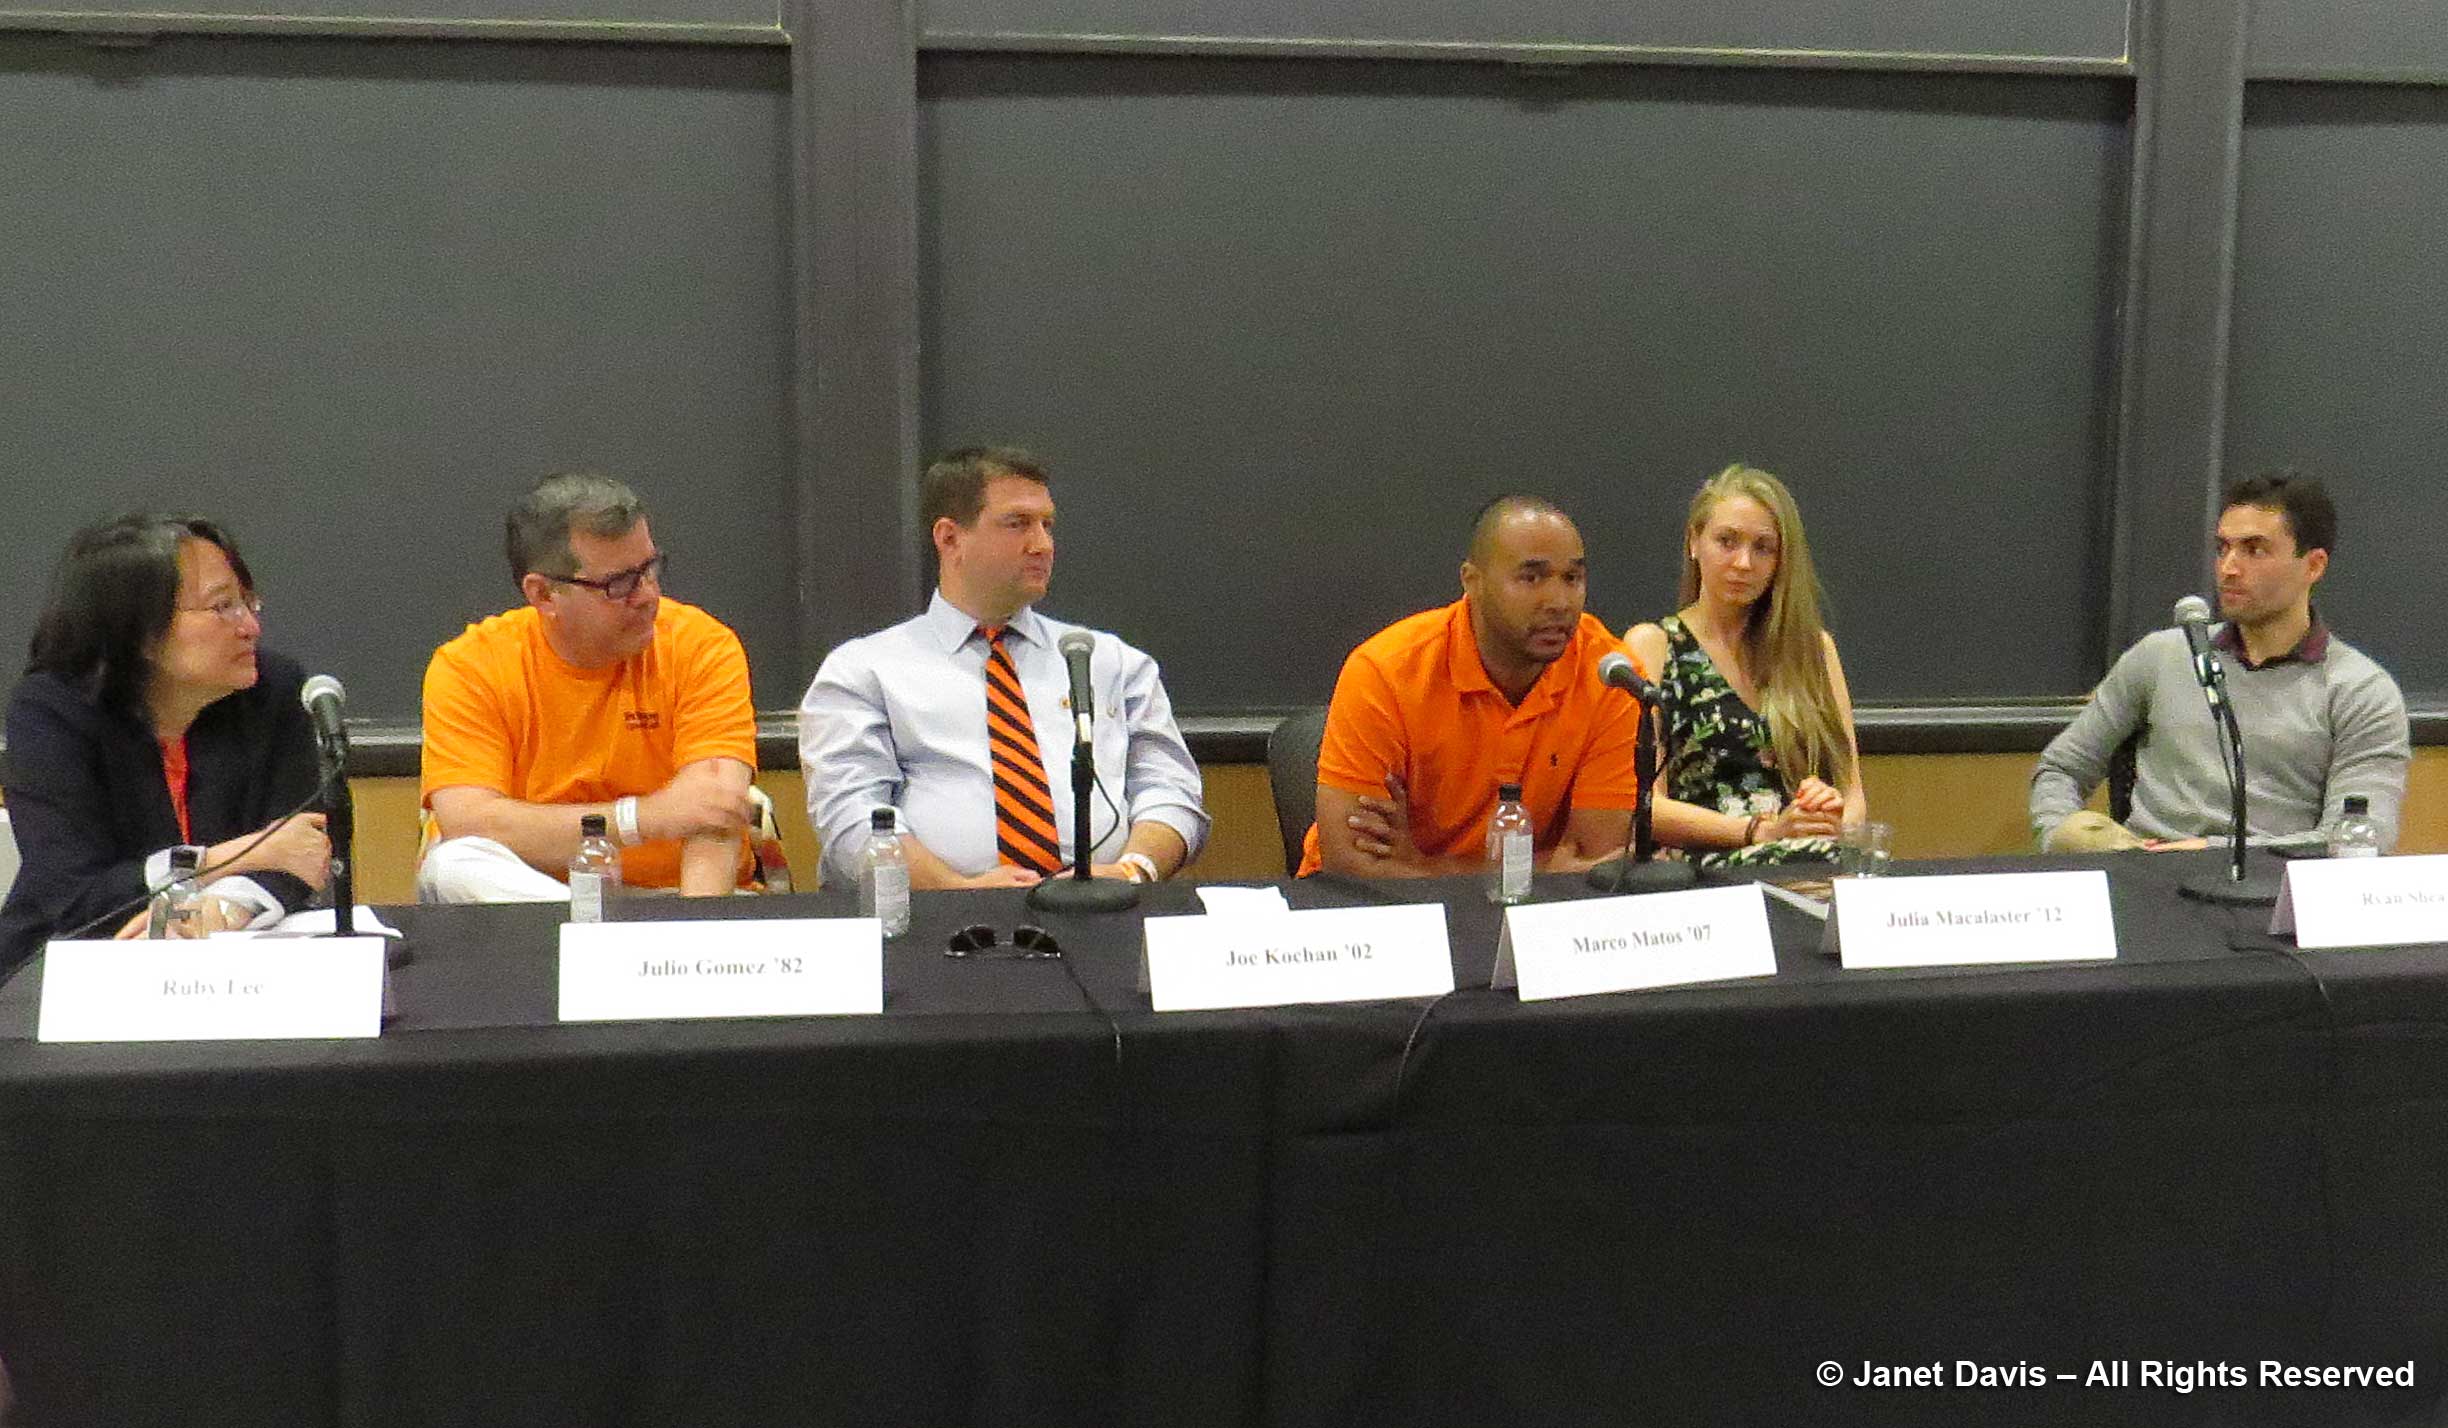 Panel for “The Next Big Thing in Tech”, Princeton Reunions 2017 (left to right): Moderator Ruby Lee, Forrest G. Hamrick Prof. of Electrical Engineering; Julio Gomez ’82, Financial Services Technology Strategist; Joe Kochan ’02, Co-Founder and COO, US Ignite; Marco Matos ’07, Product Manager; Facebook; Julia Macalaster ’12, Head of Strategy, Def Method; Ryan Shea ’12, Co-founder, Blockstack. 